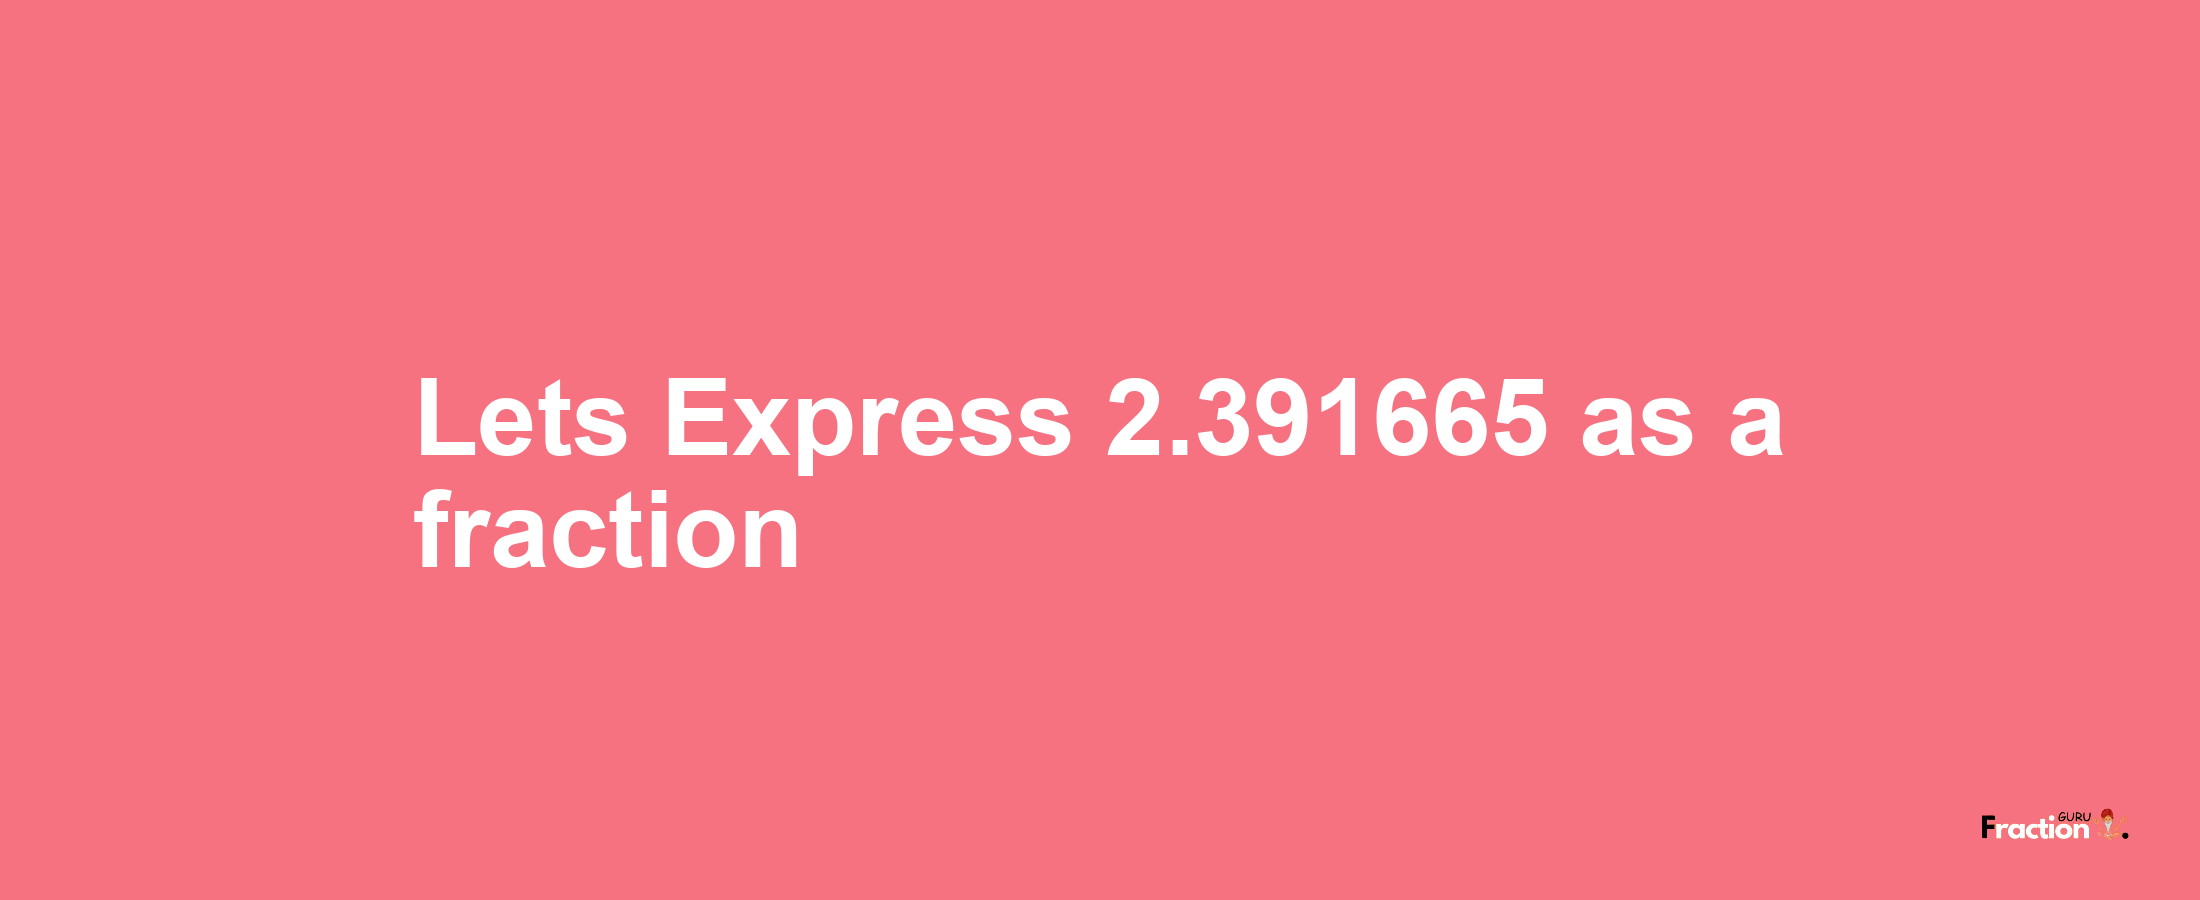 Lets Express 2.391665 as afraction